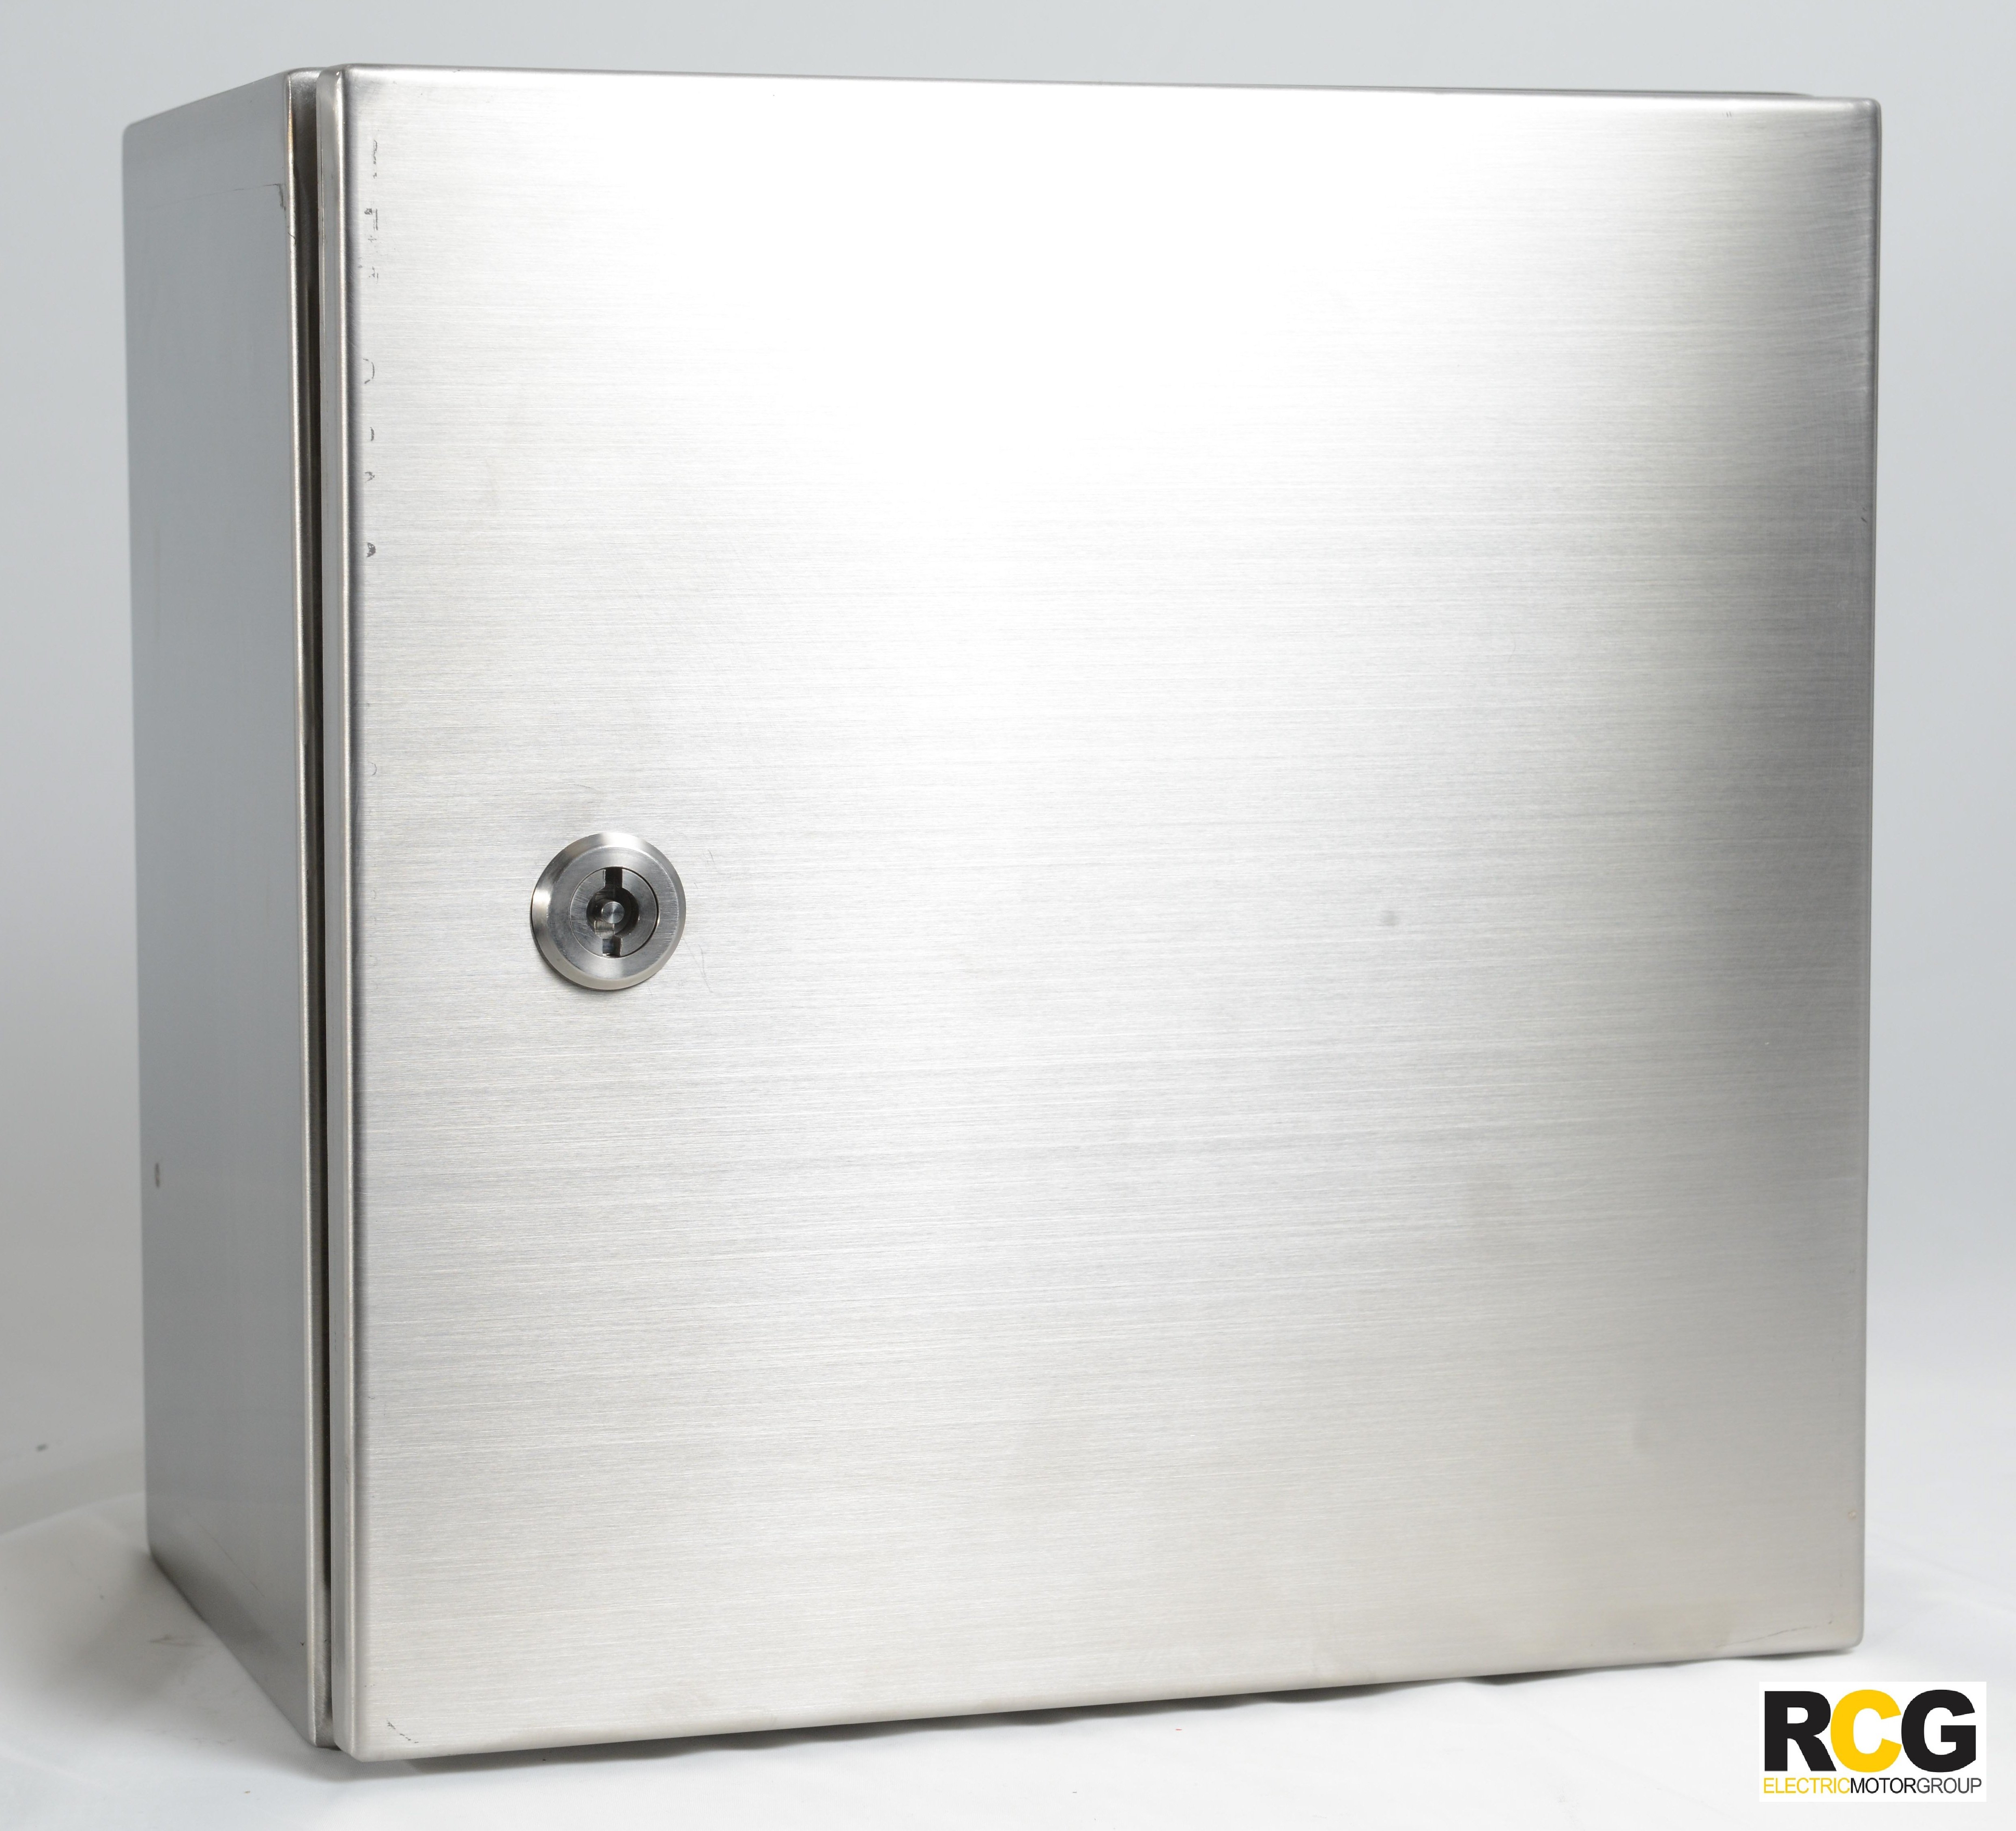 RCG stainless steel enclosure 304 grade 500x400x250mm - wall mounting